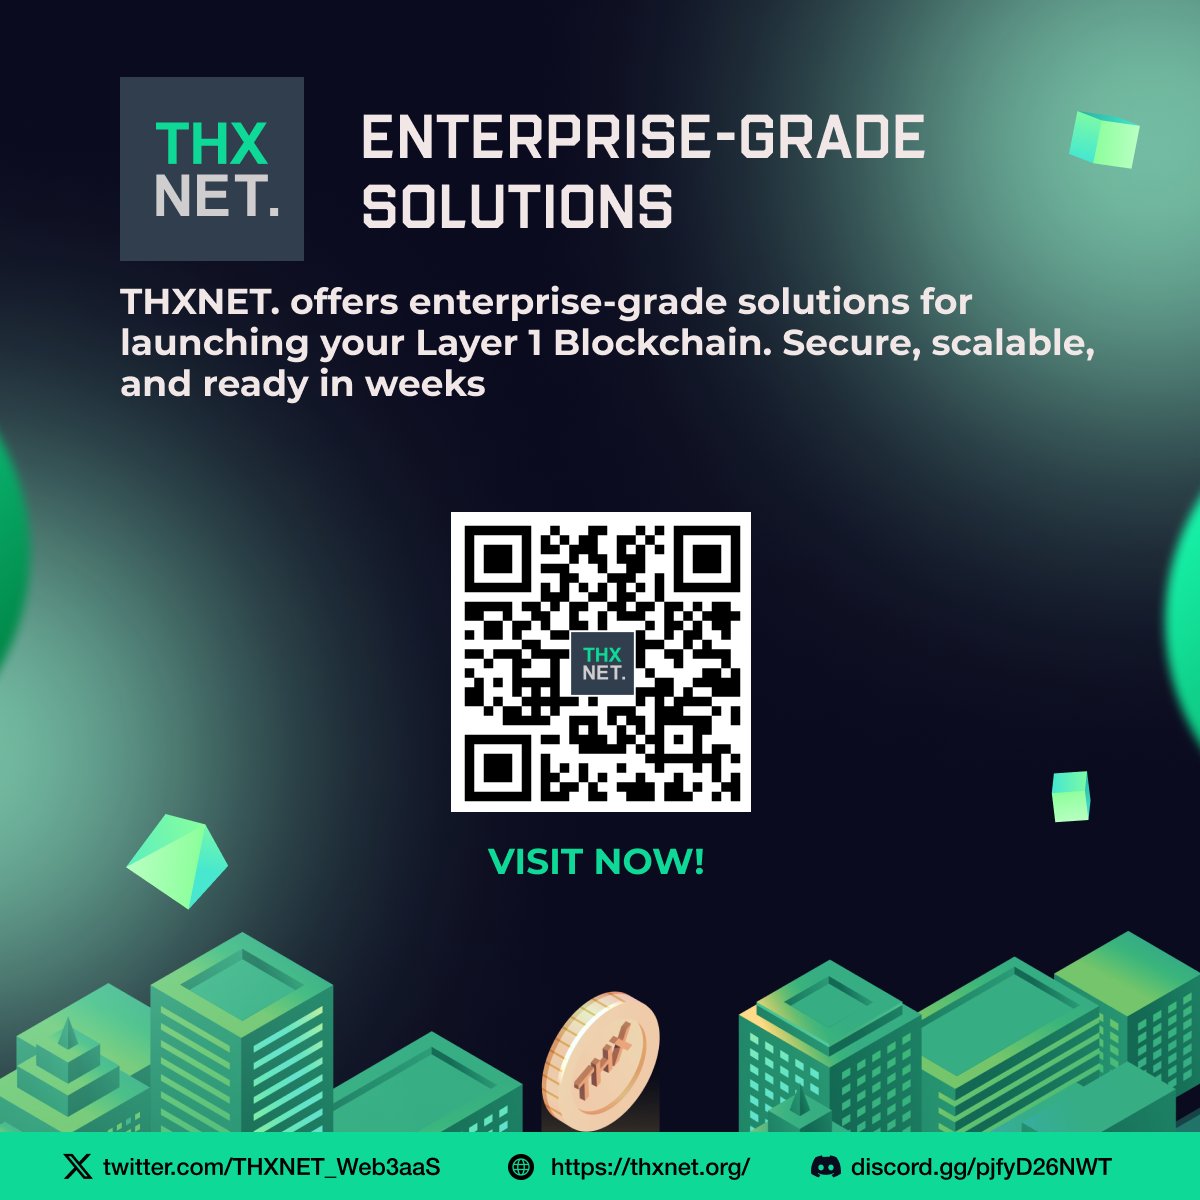 Enterprise-grade solutions🪩

THXNET. offers enterprise-grade solutions for launching your Layer 1 Blockchain. Secure, scalable, and ready in weeks! 🔒  

#EnterpriseBlockchain #THXNET